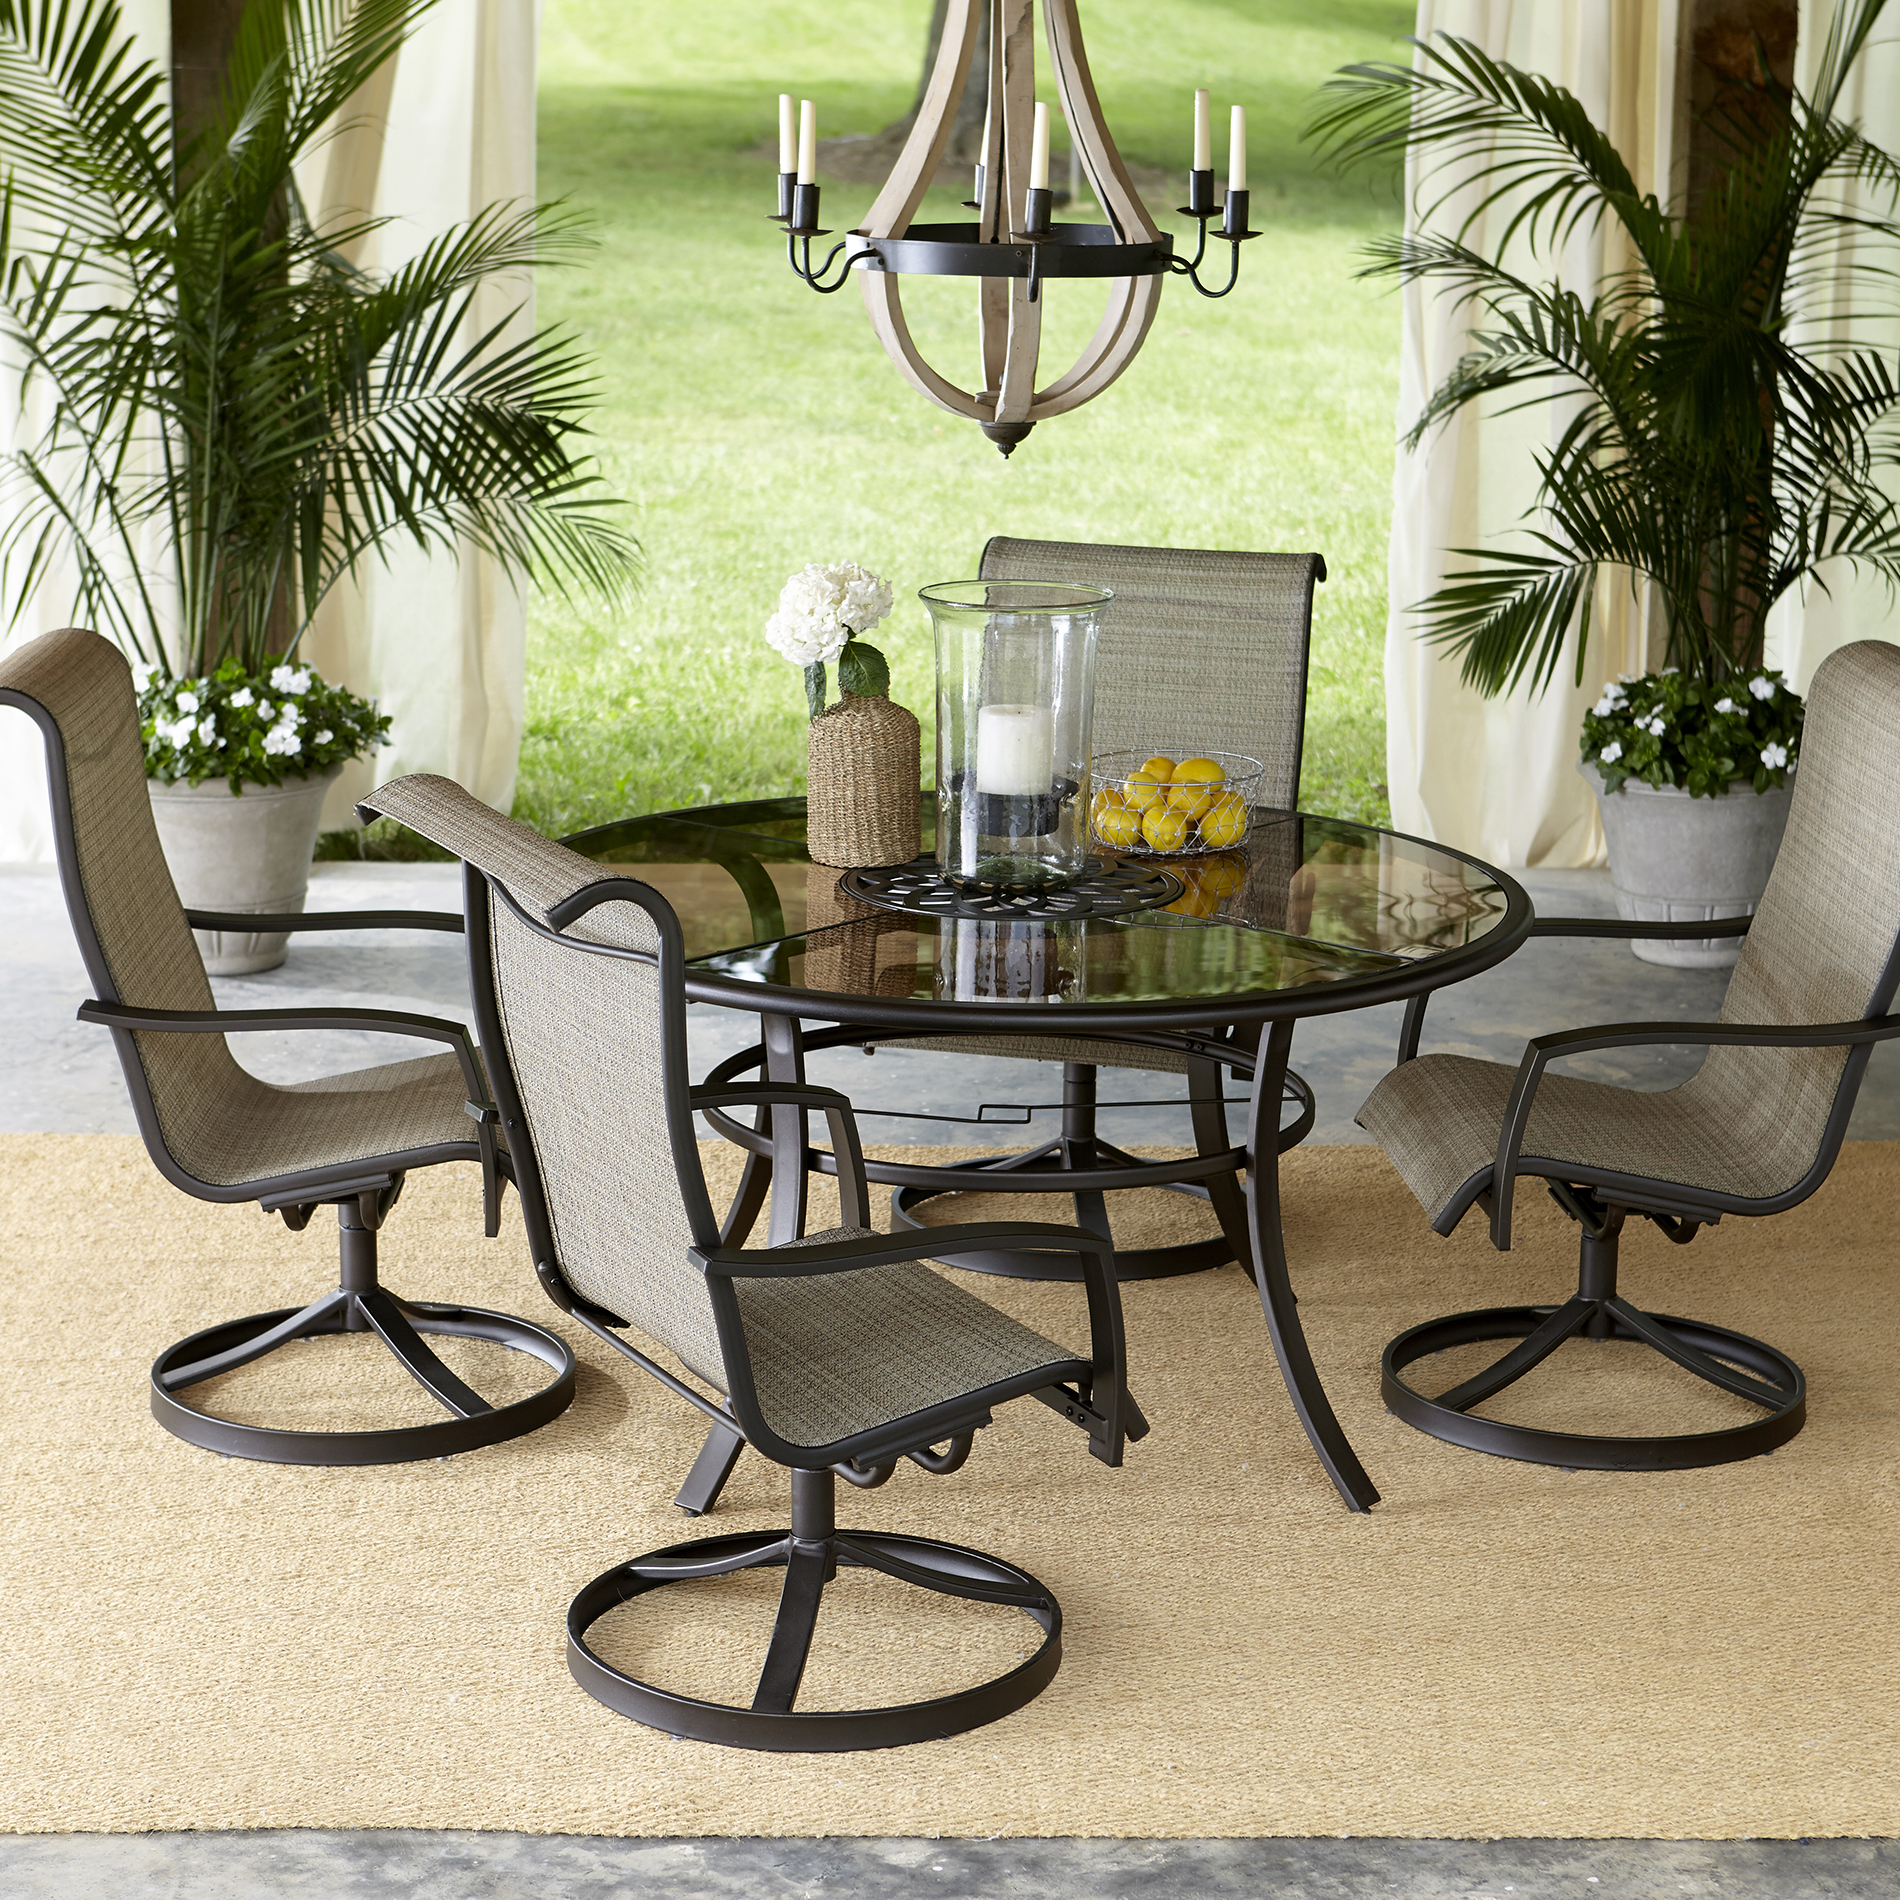 outdoor dining sets photo - 6